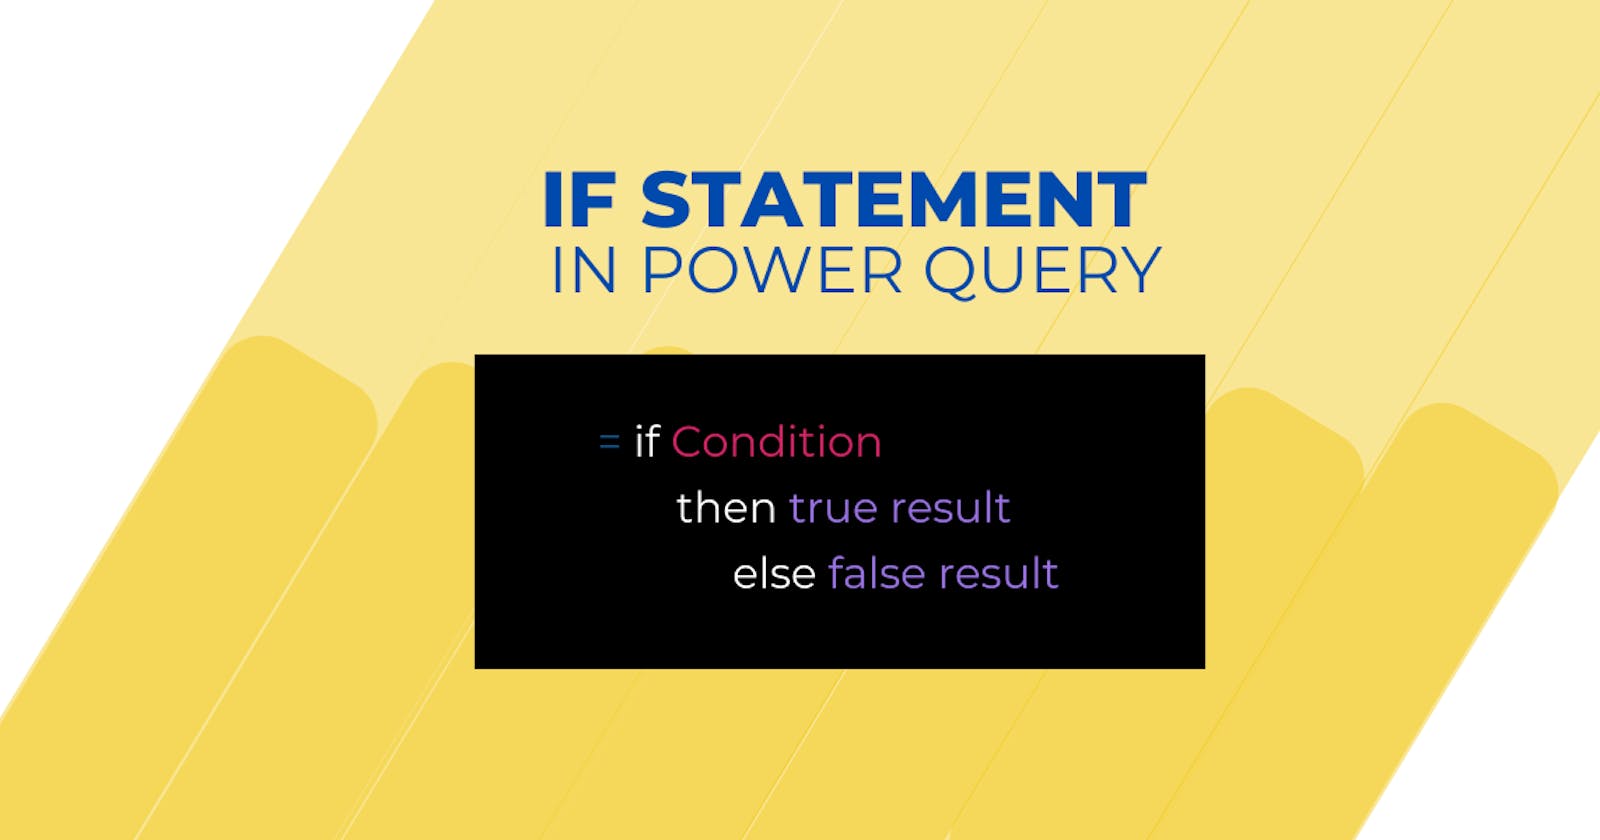 IF Statement using Power Query